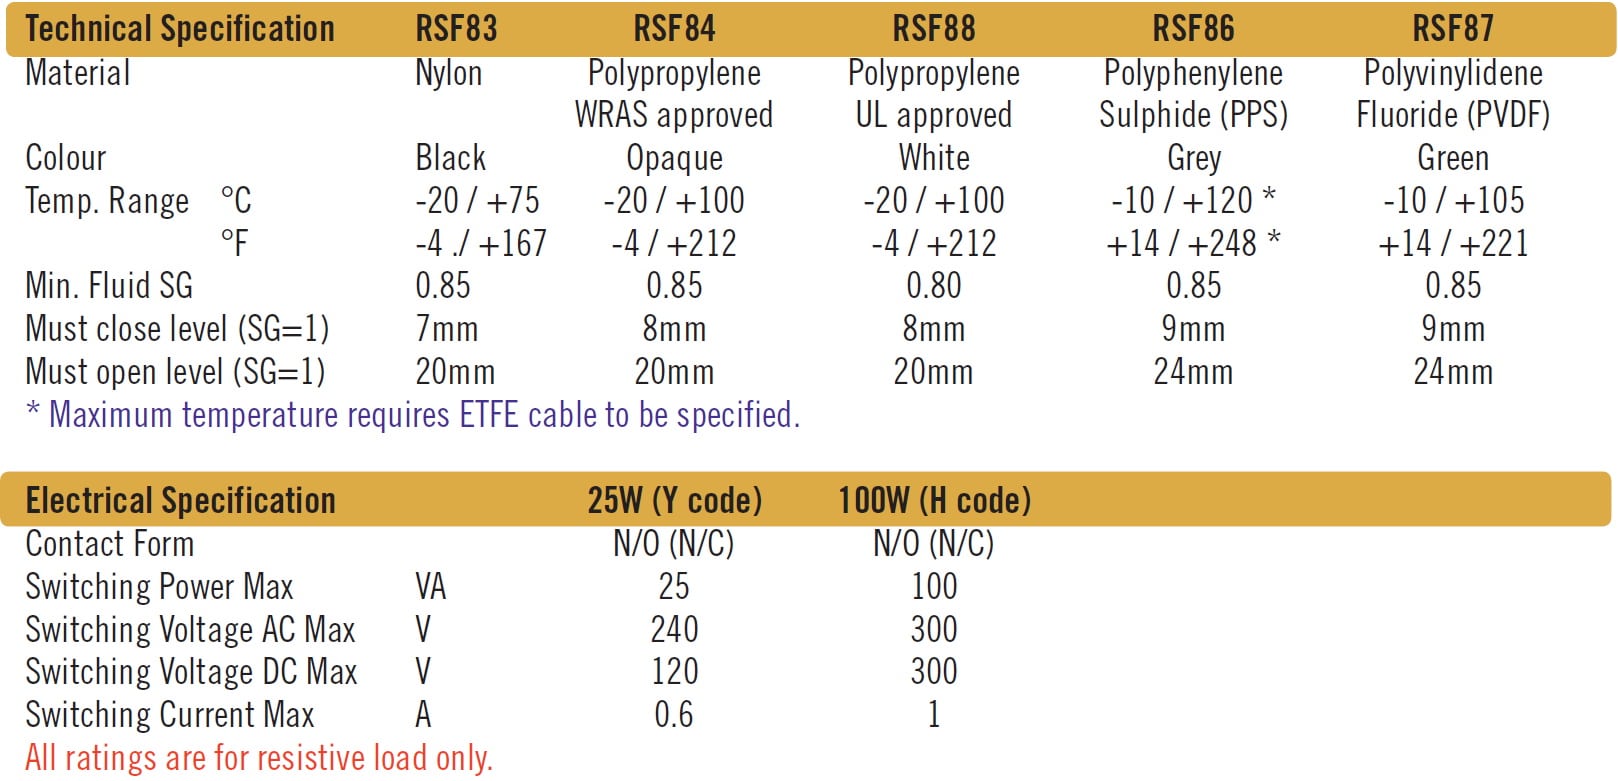 Cynergy3 RSF80 series specifications